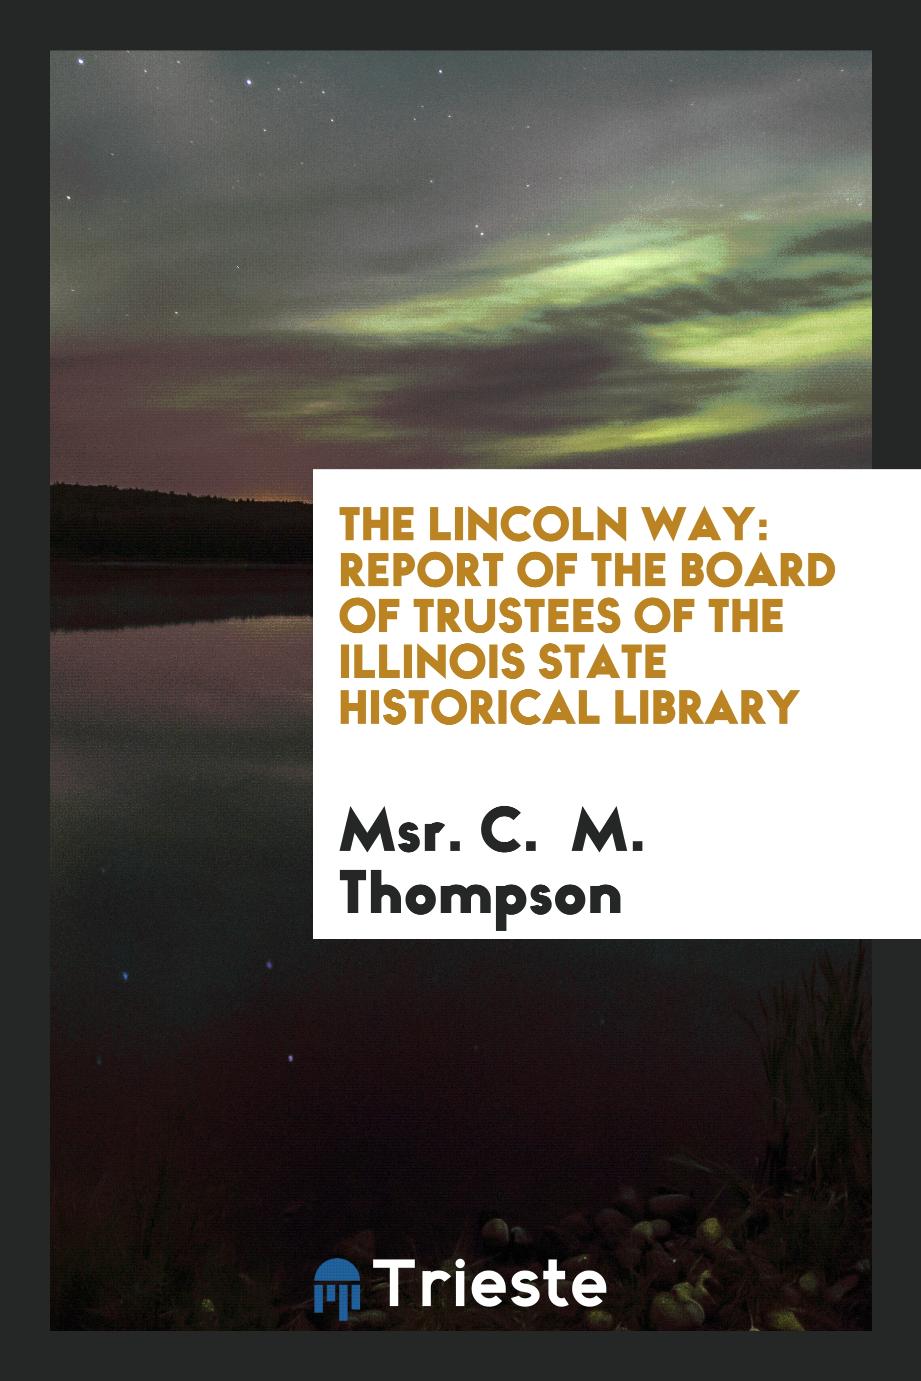 The Lincoln way: Report of the Board of trustees of the Illinois State Historical Library